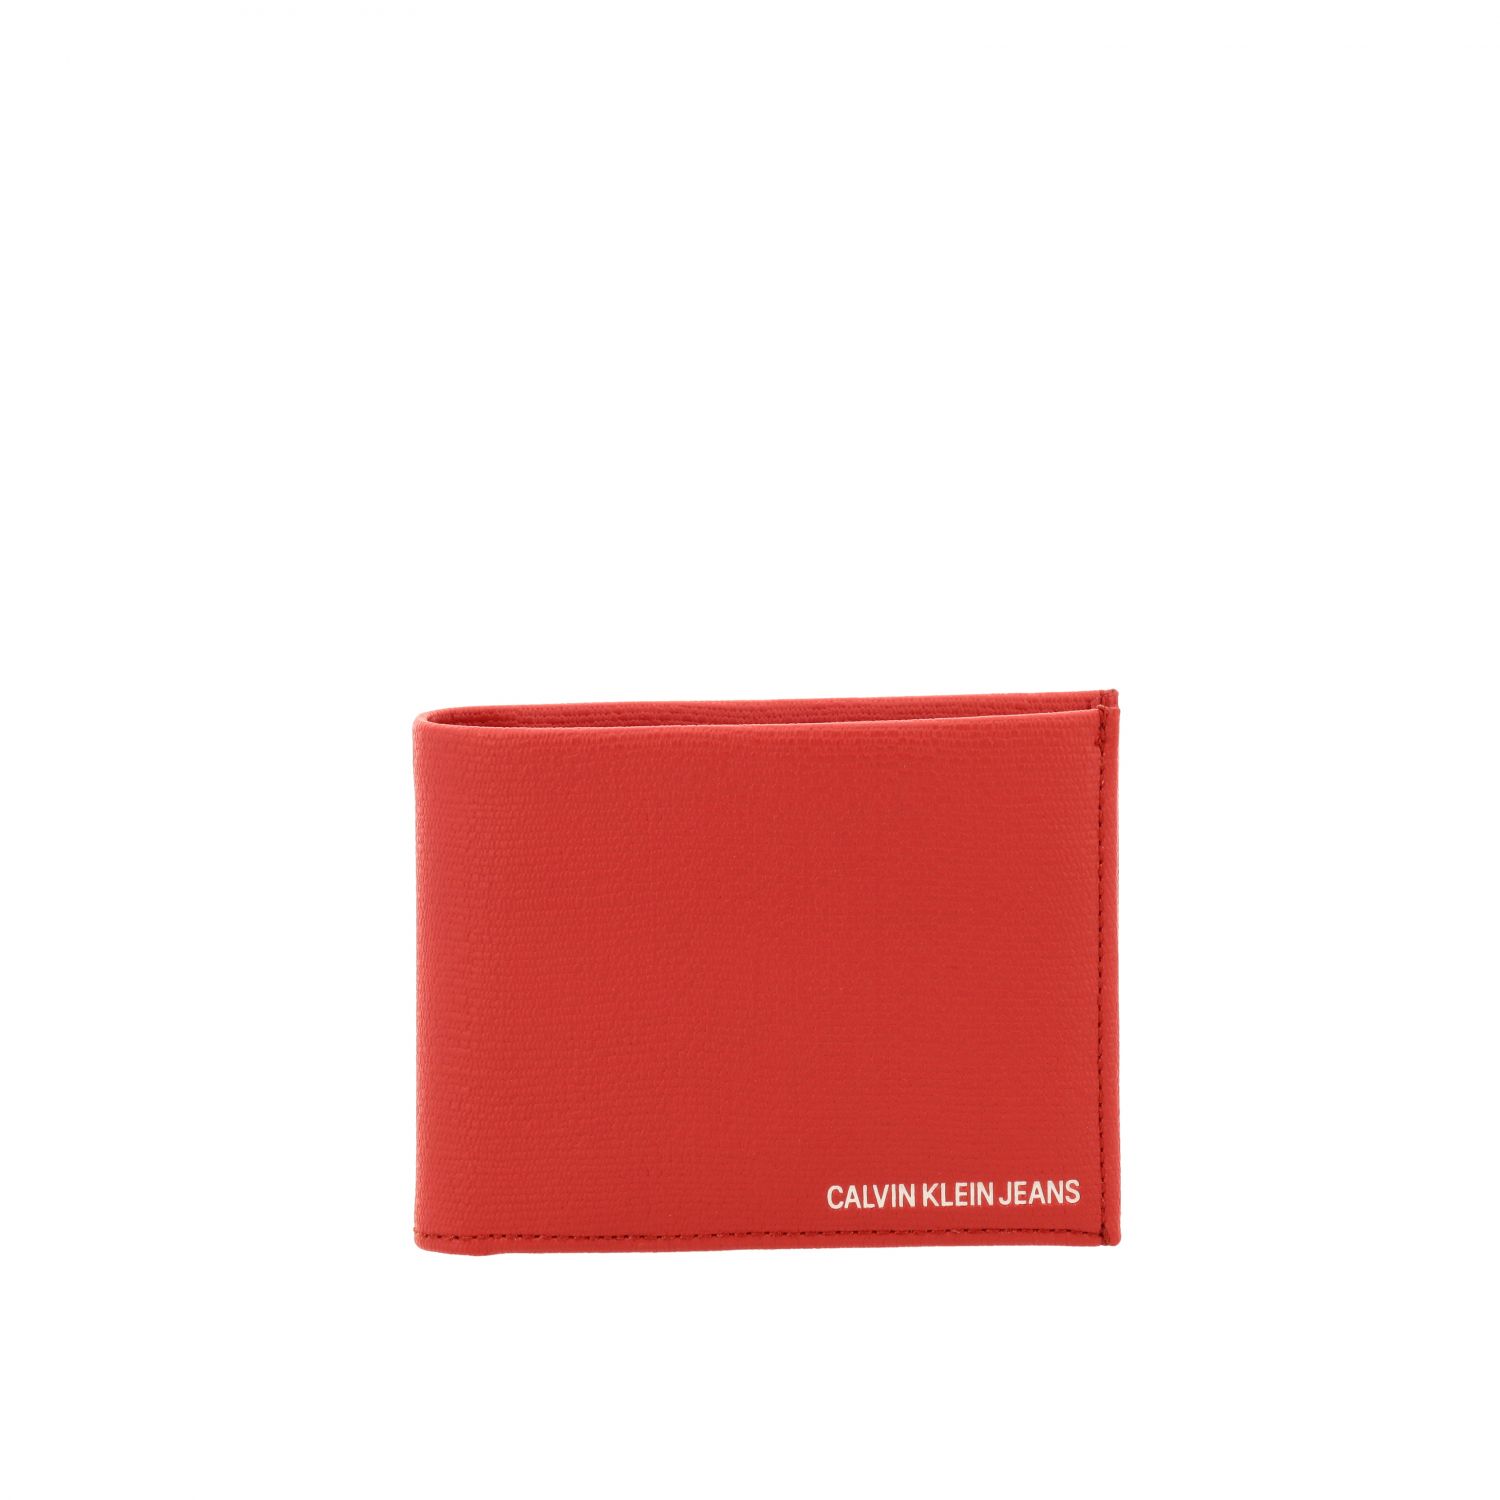 Calvin Klein Jeans Outlet: wallet for man - Red | Calvin Klein Jeans wallet  K50K504748 online on 